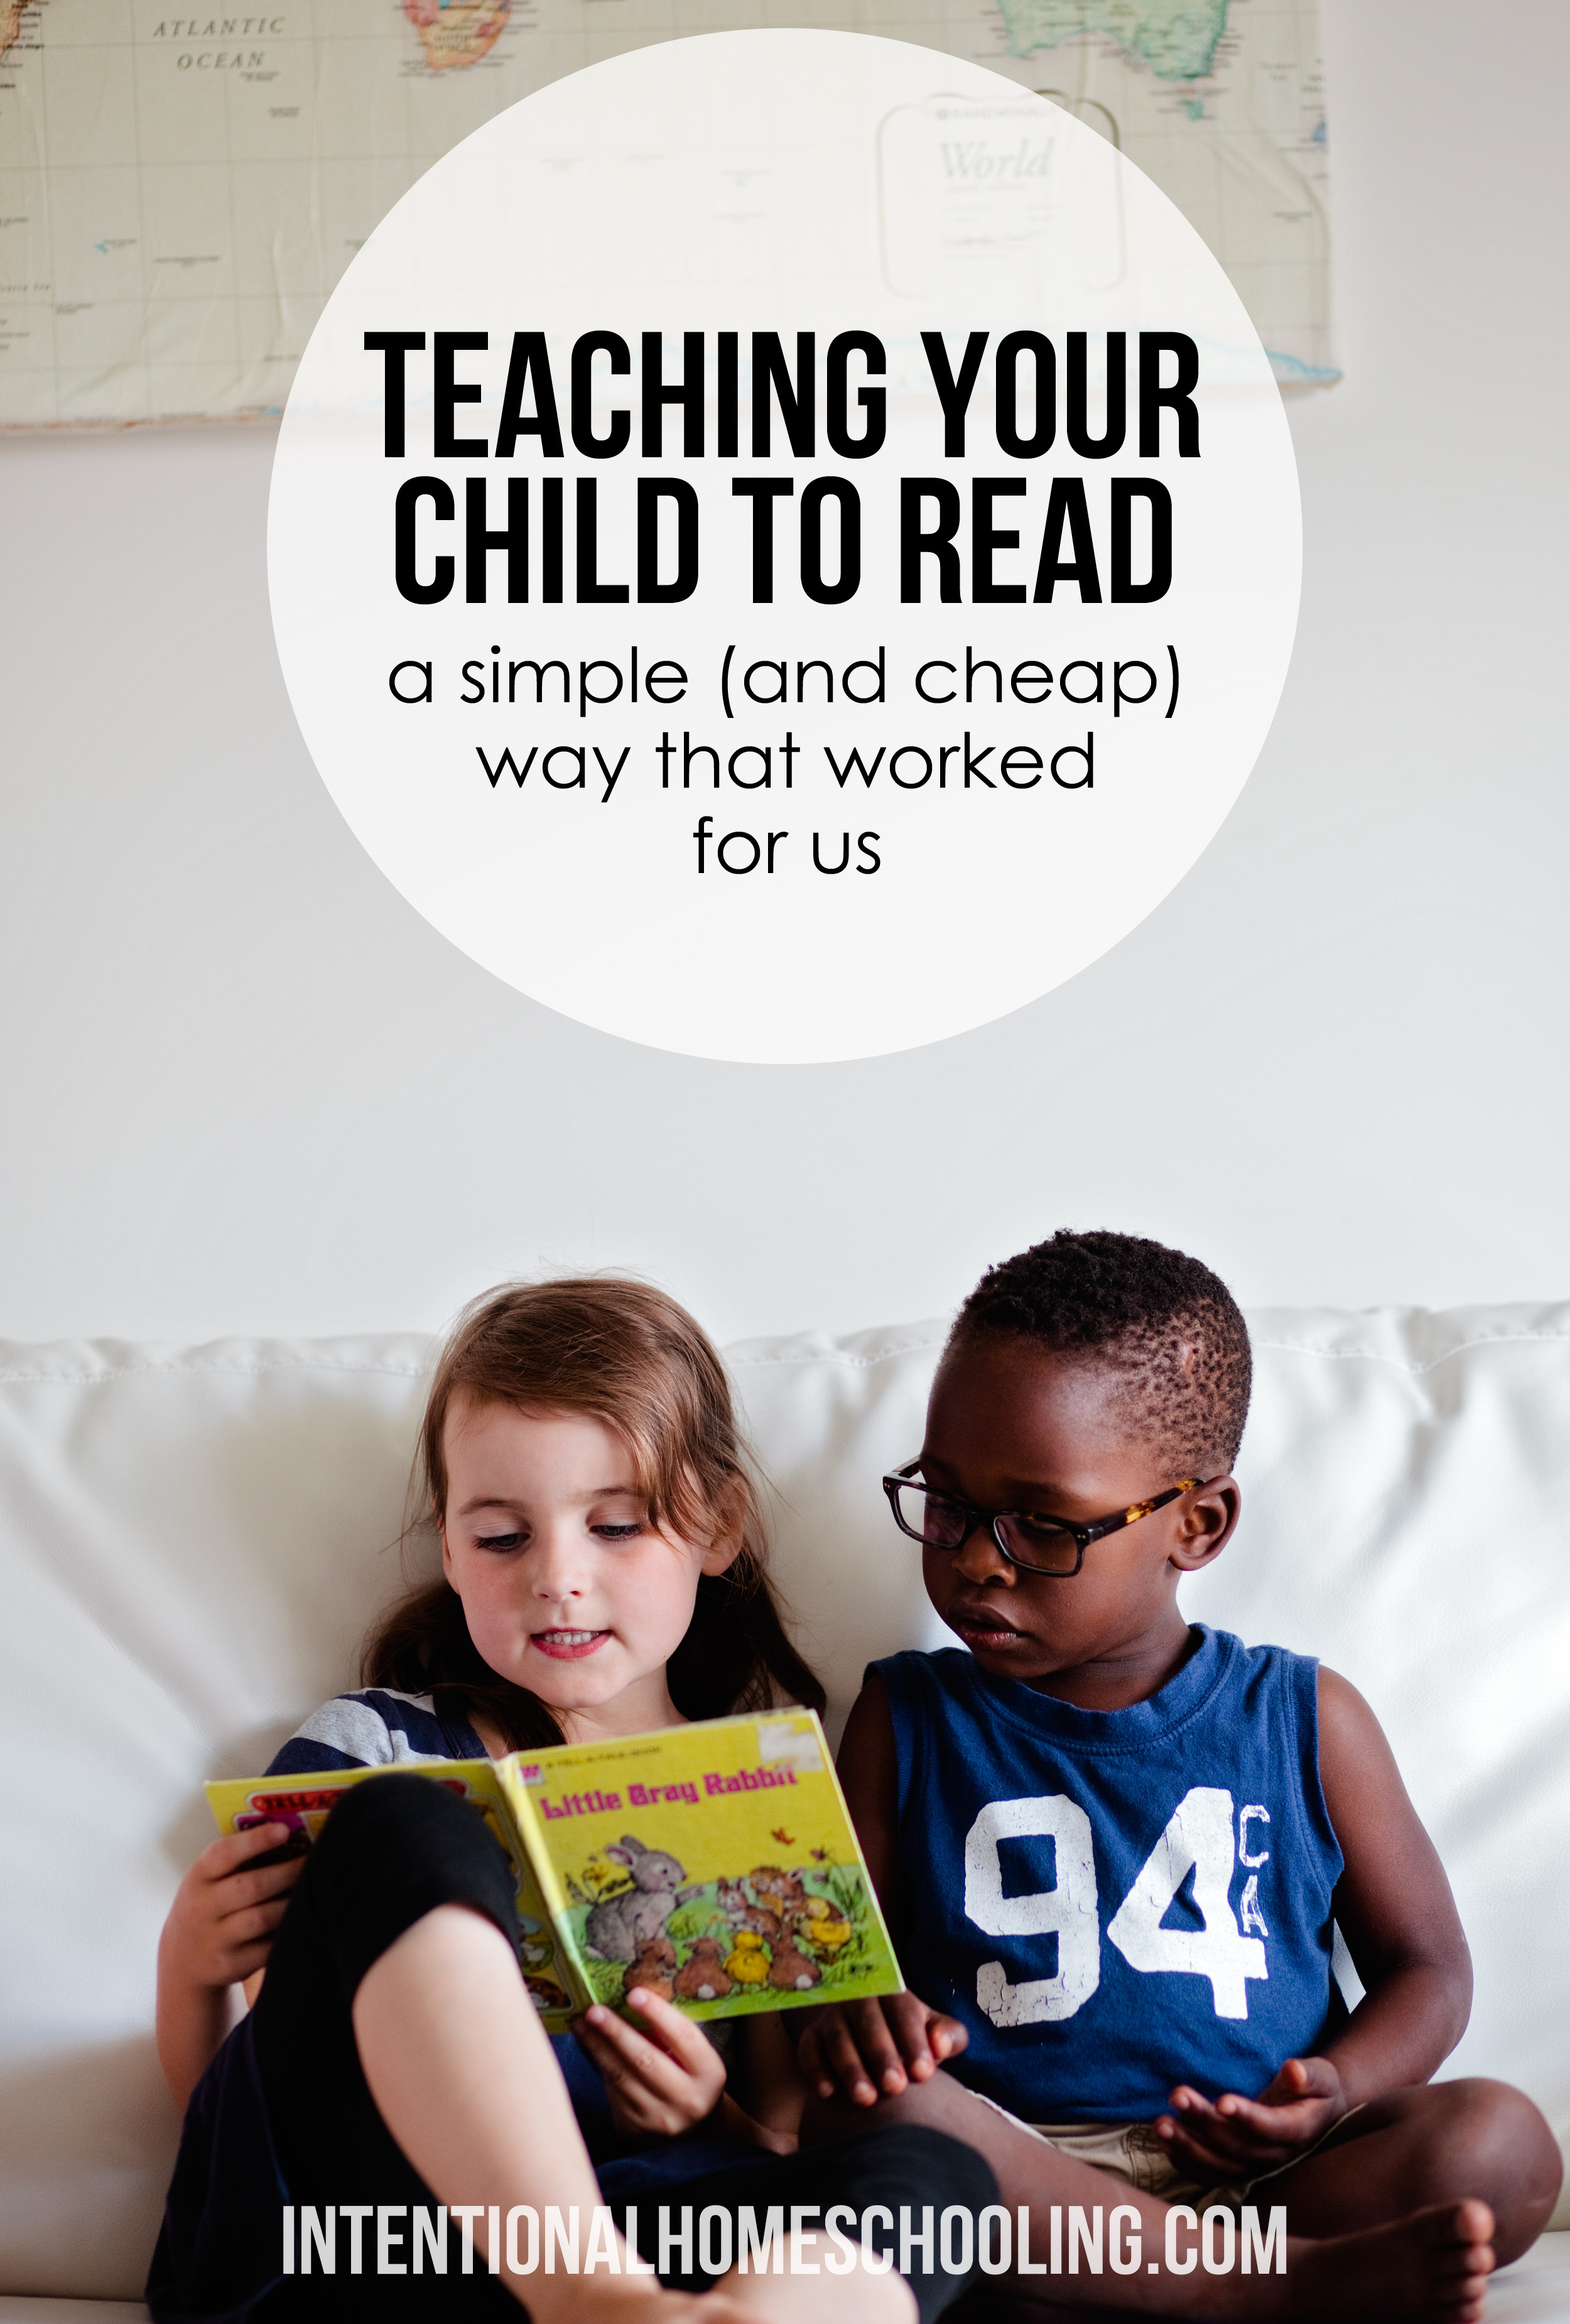 Teach reading the simple way, an easy to follow and cheap method that worked for us and may be a good fit for your child.